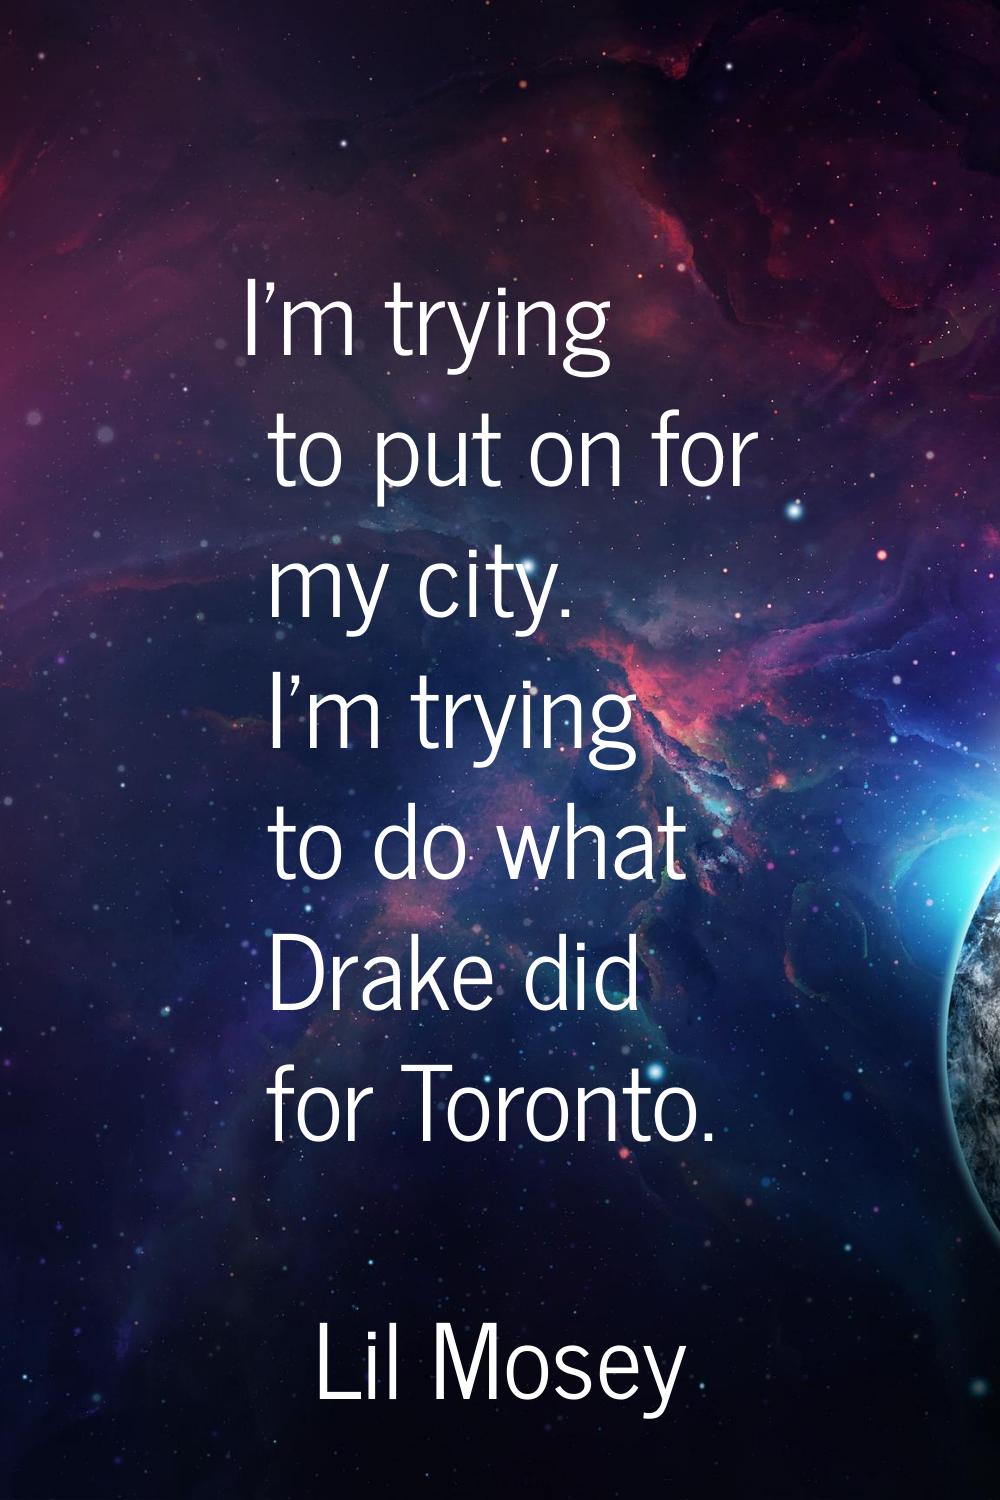 I'm trying to put on for my city. I'm trying to do what Drake did for Toronto.